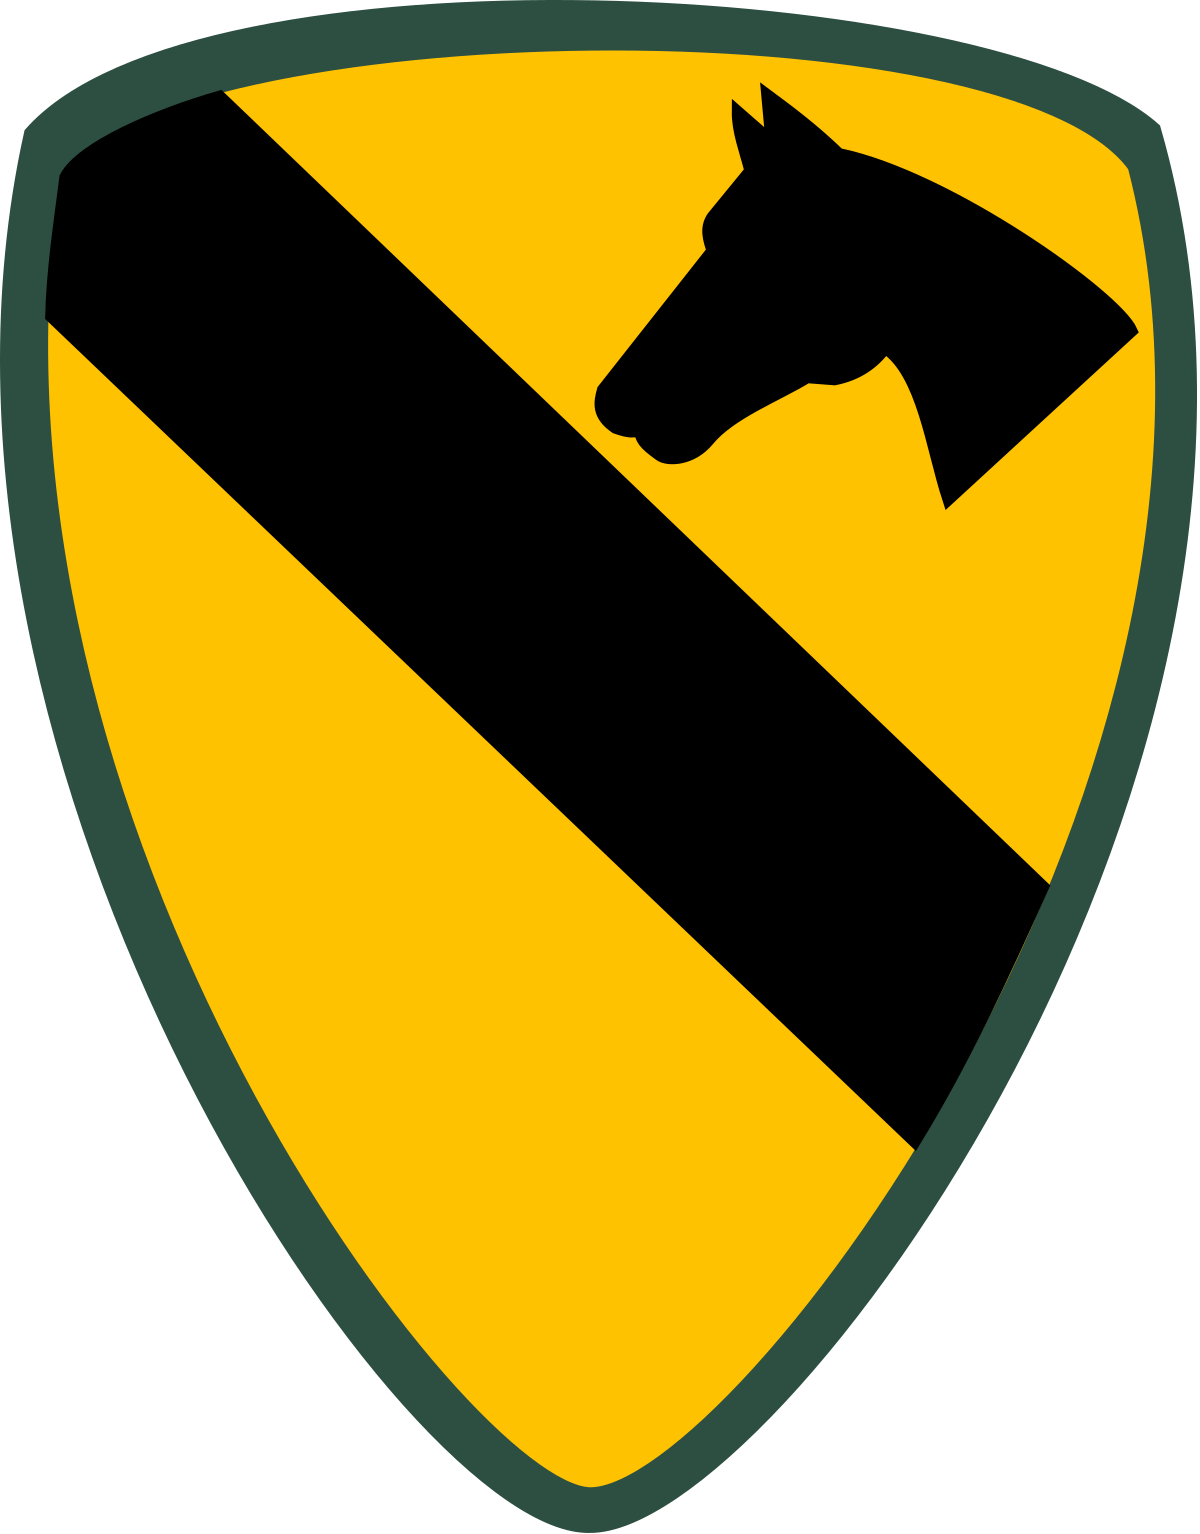 63d Cavalry Division US Army